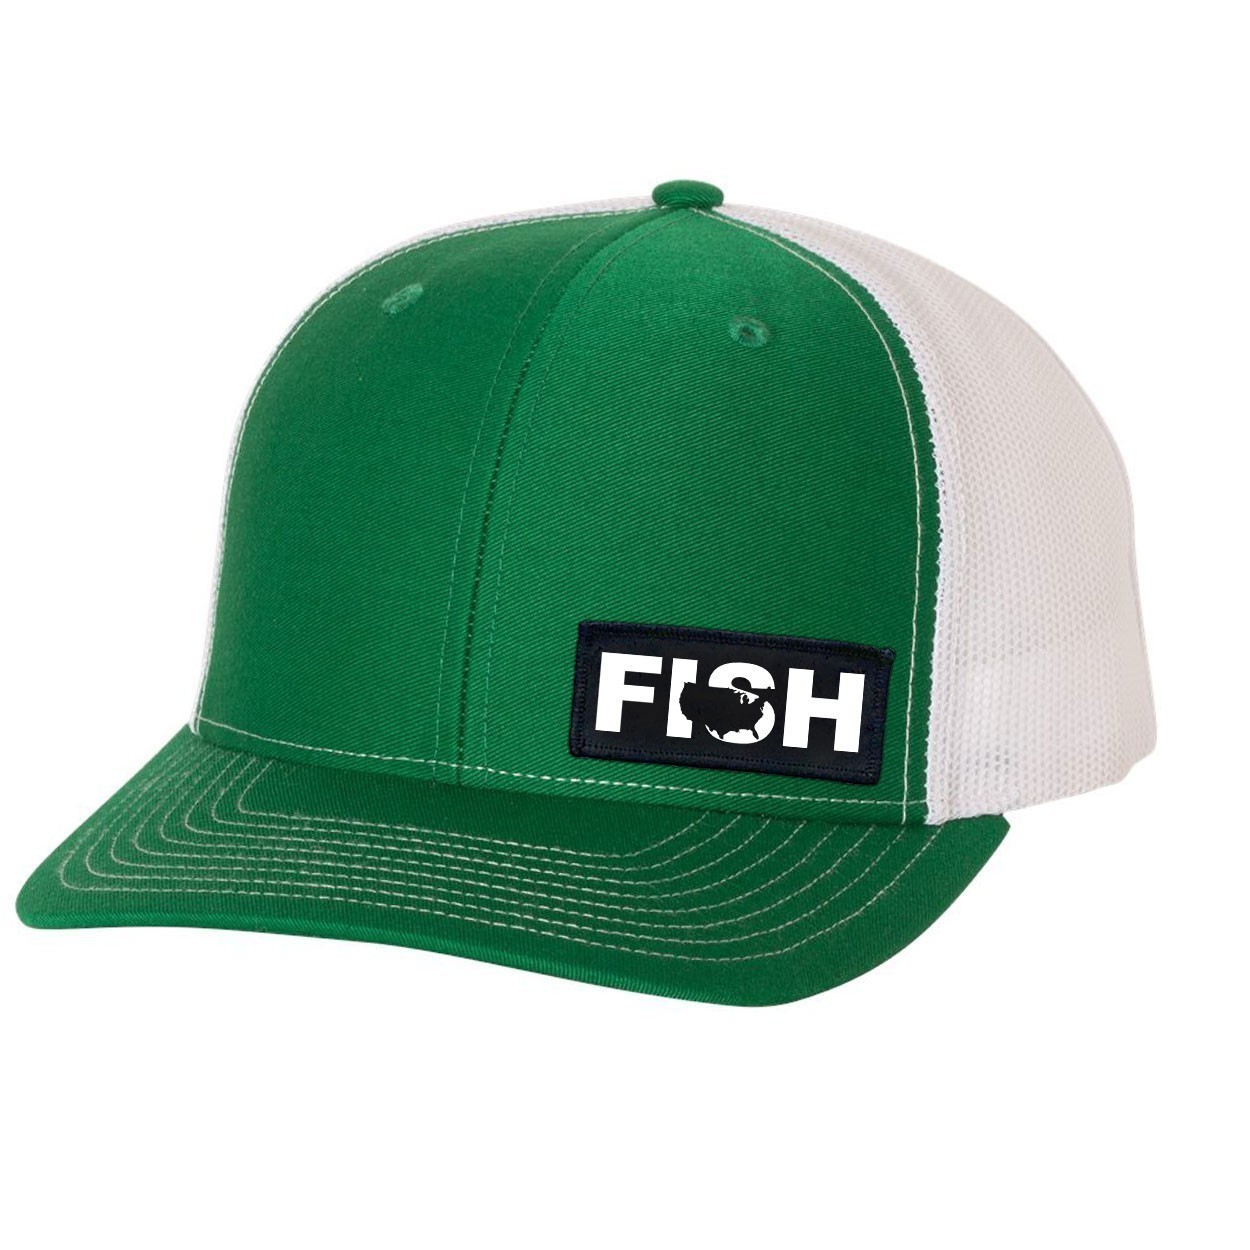 Fish United States Night Out Woven Patch Snapback Trucker Hat Green/White (White Logo)